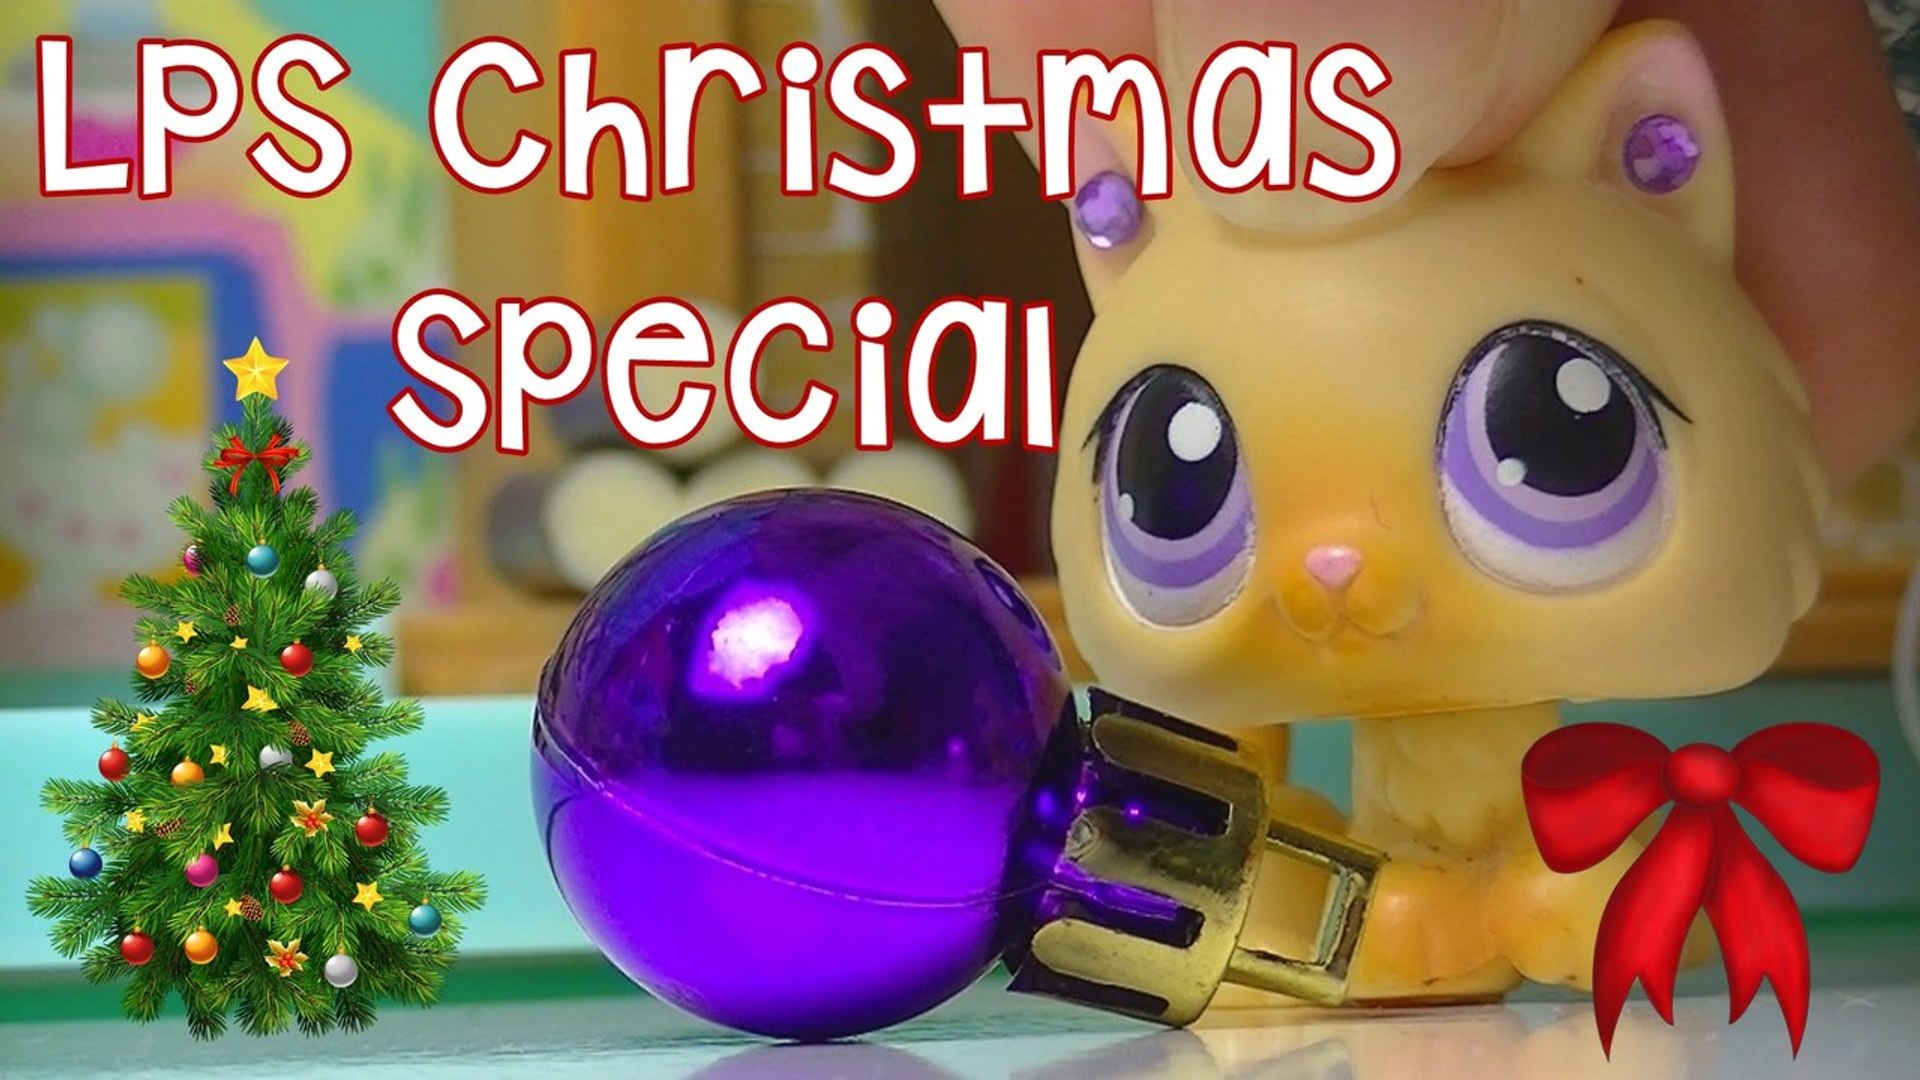 ❄ LPS Christmas Special 2014 ❄ - video Dailymotion